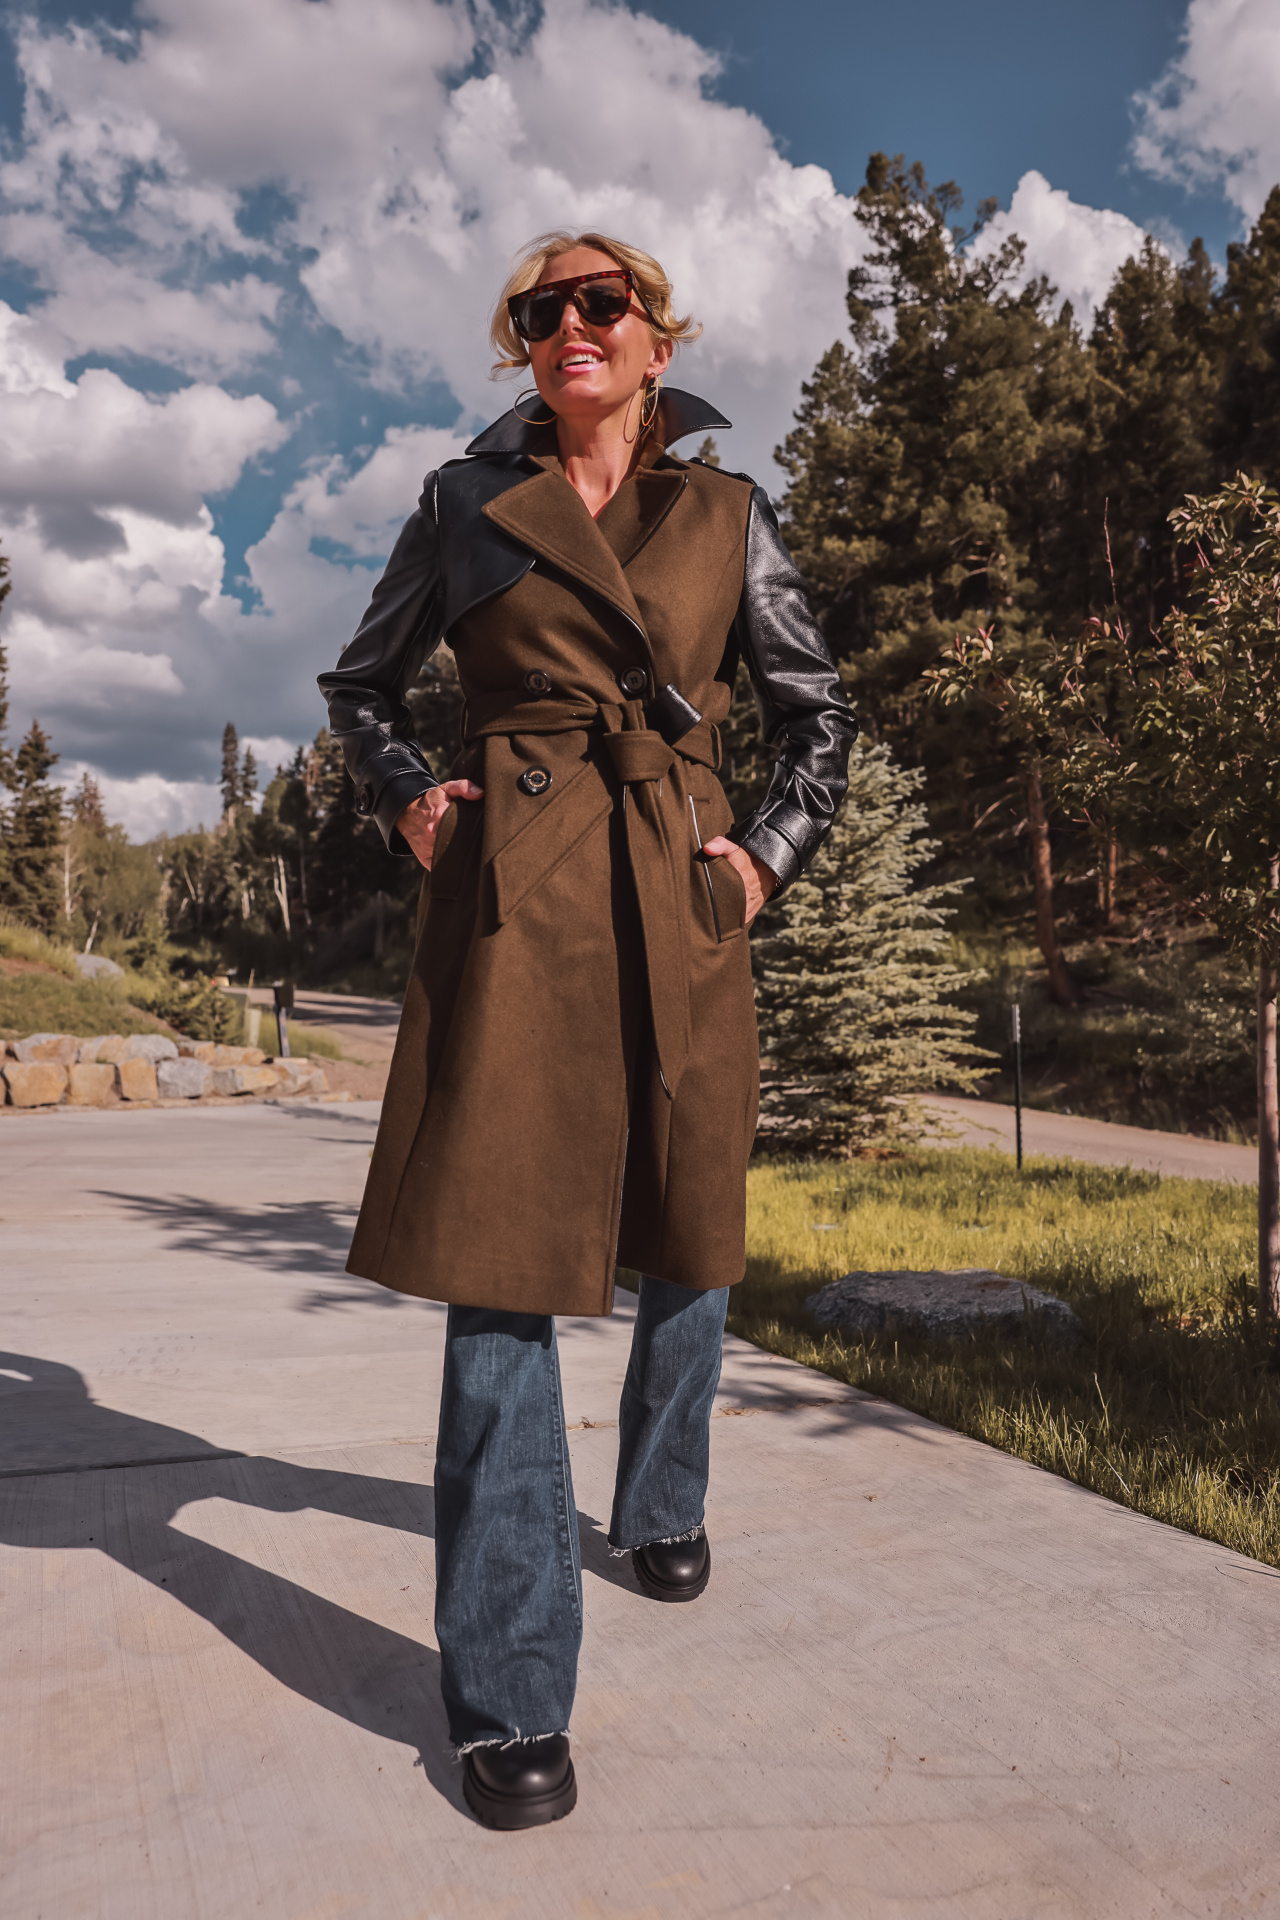 wearable fall trends, fall fashion trends, fall trends, wearable trends, how to wear trends, trends over 40, wearing trends over 40, 2022 fall fashion trends, 2022 wearable fall trends, iconic 80s, Fall jackets, fall outfits, best jackets for fall, don’t look frumpy in fall jackets, 3rd layer for fall, how to complete an outfit, leather blazers, black blazers, trench coat, what to wear with jeans and a t-shirt